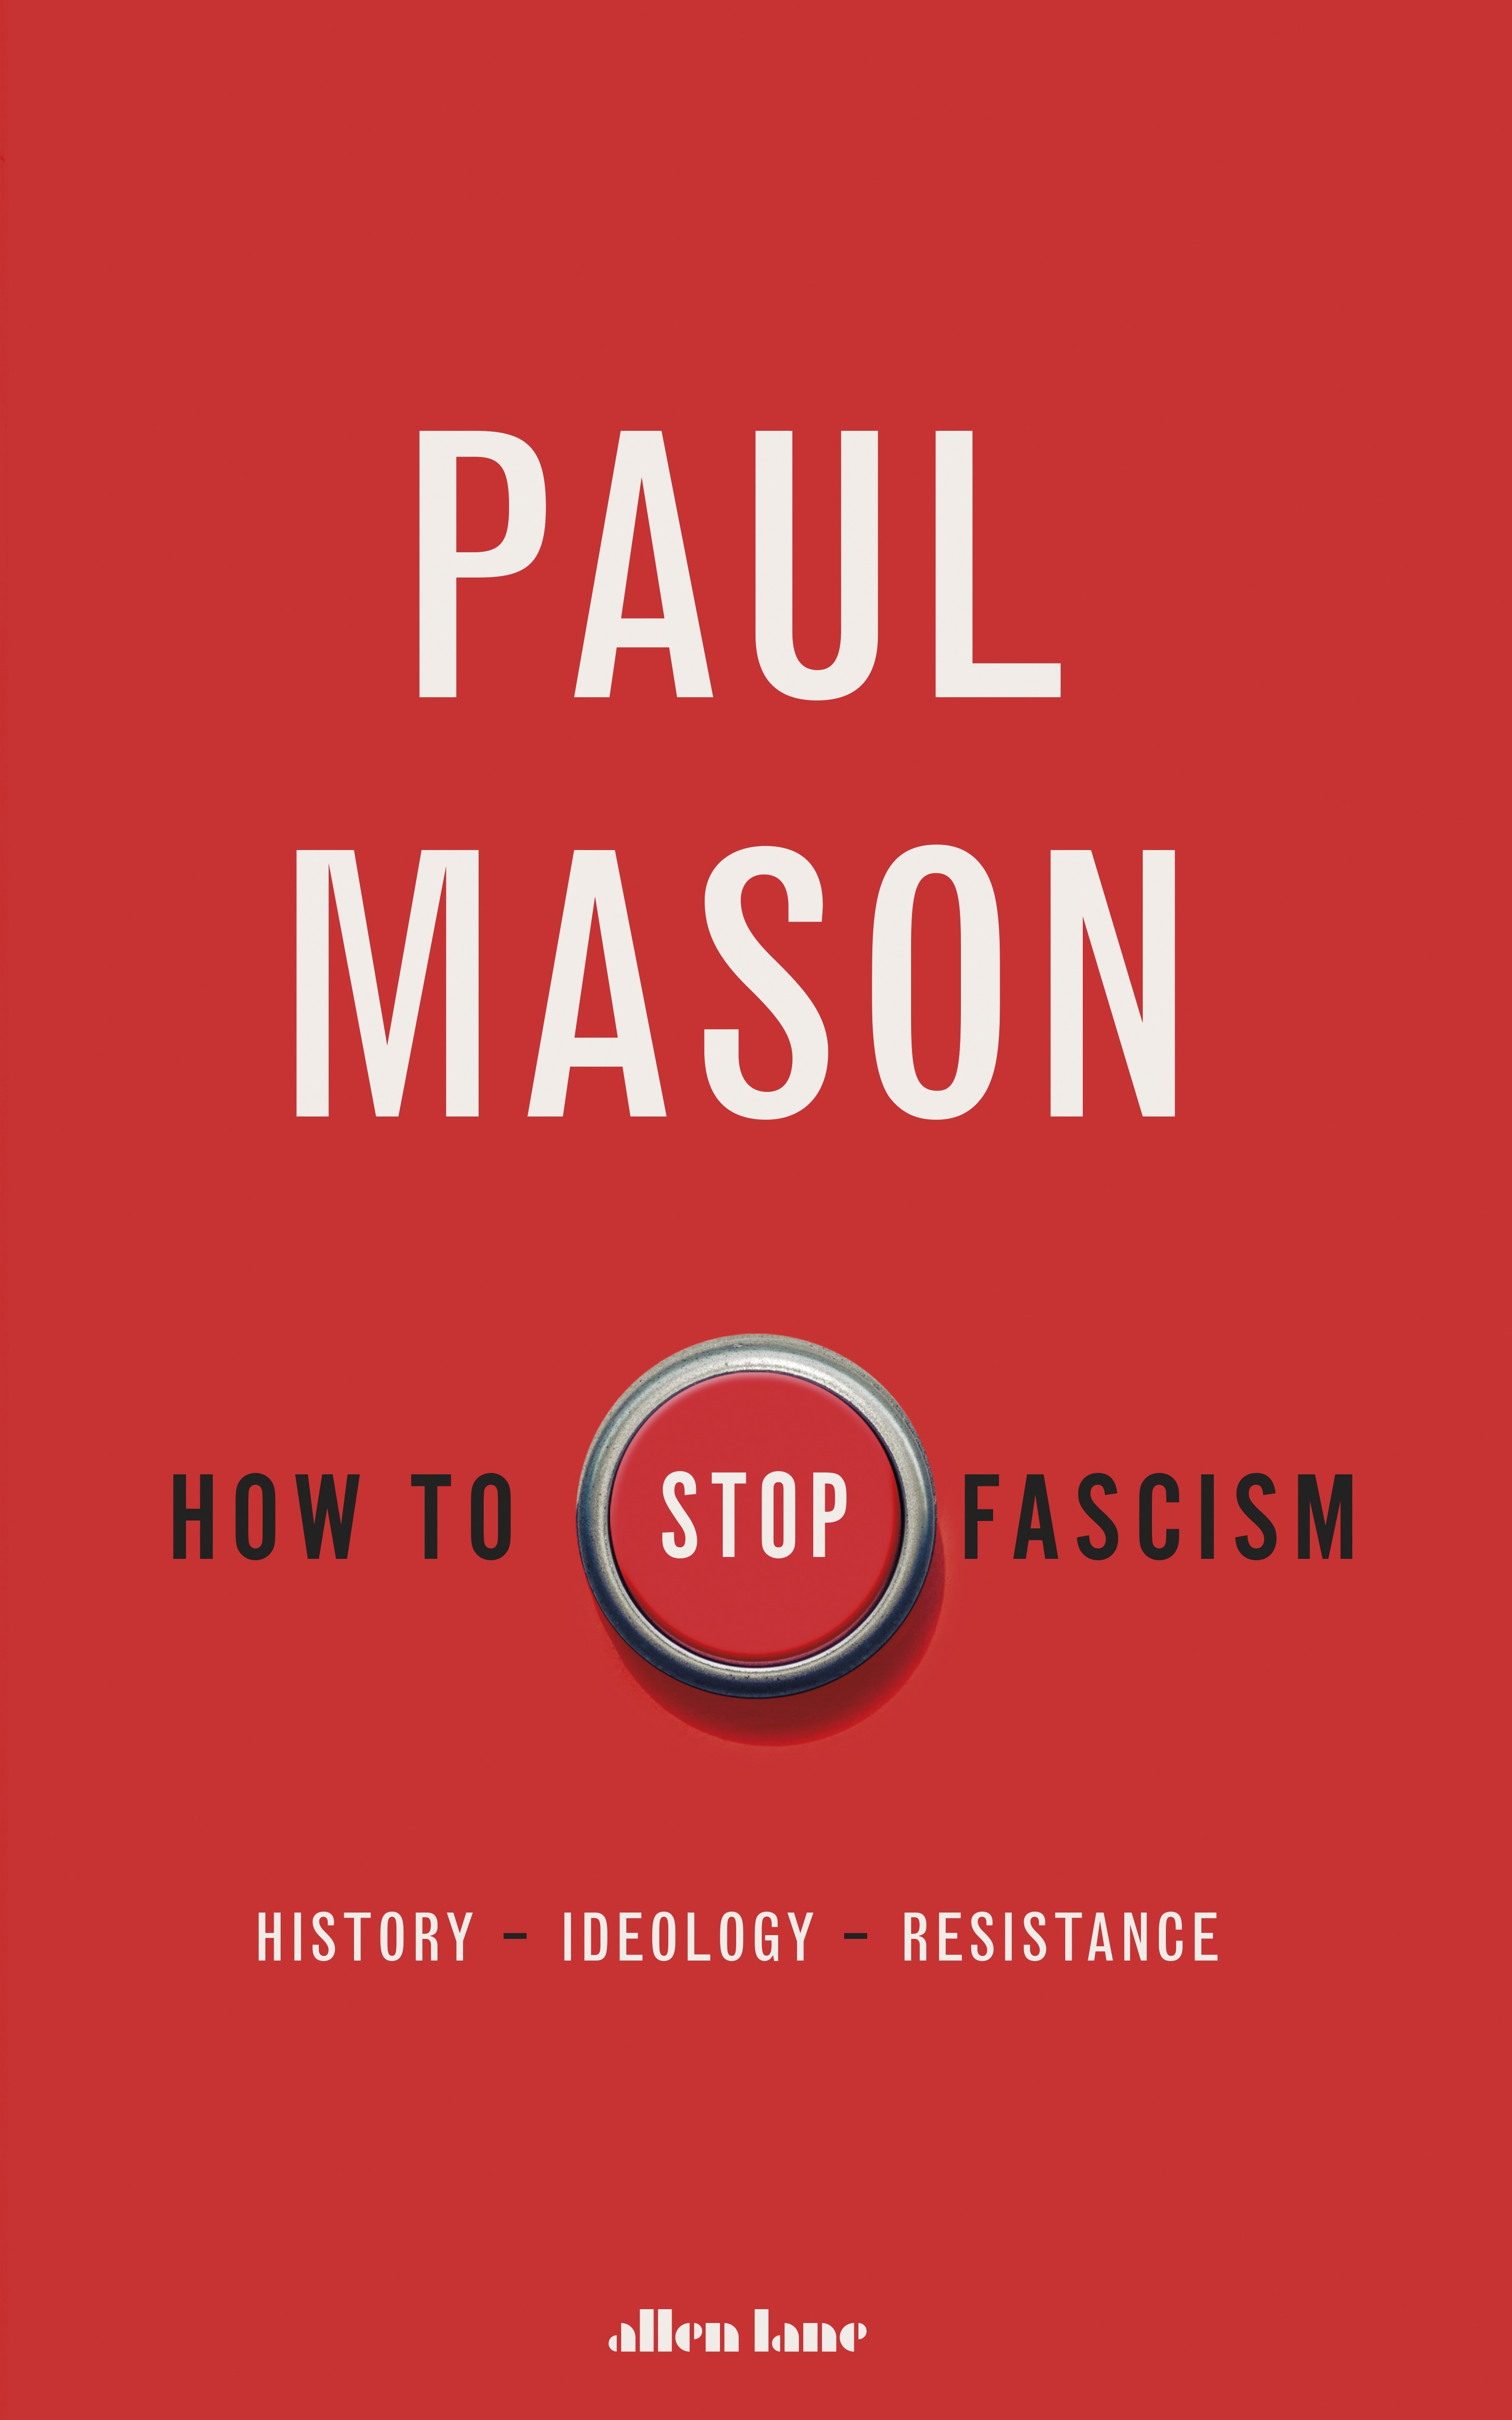 Book “How to Stop Fascism” by Paul Mason — August 26, 2021